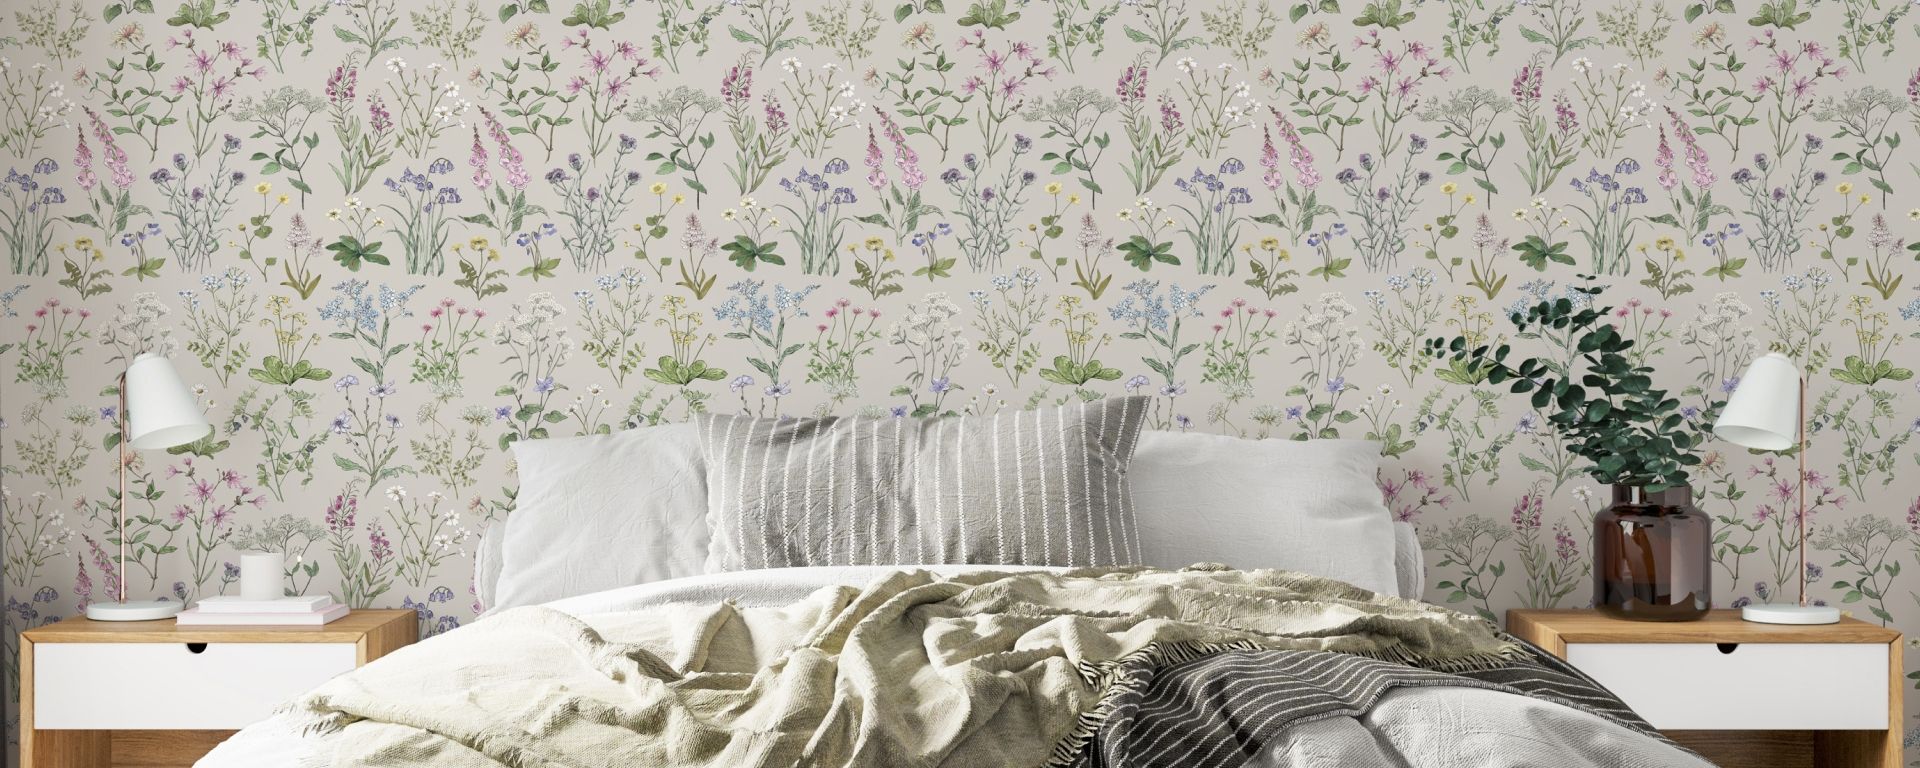 Wild Meadow Wallpaper - Colorway: Stone - Insitu - Floral Emporium Collection